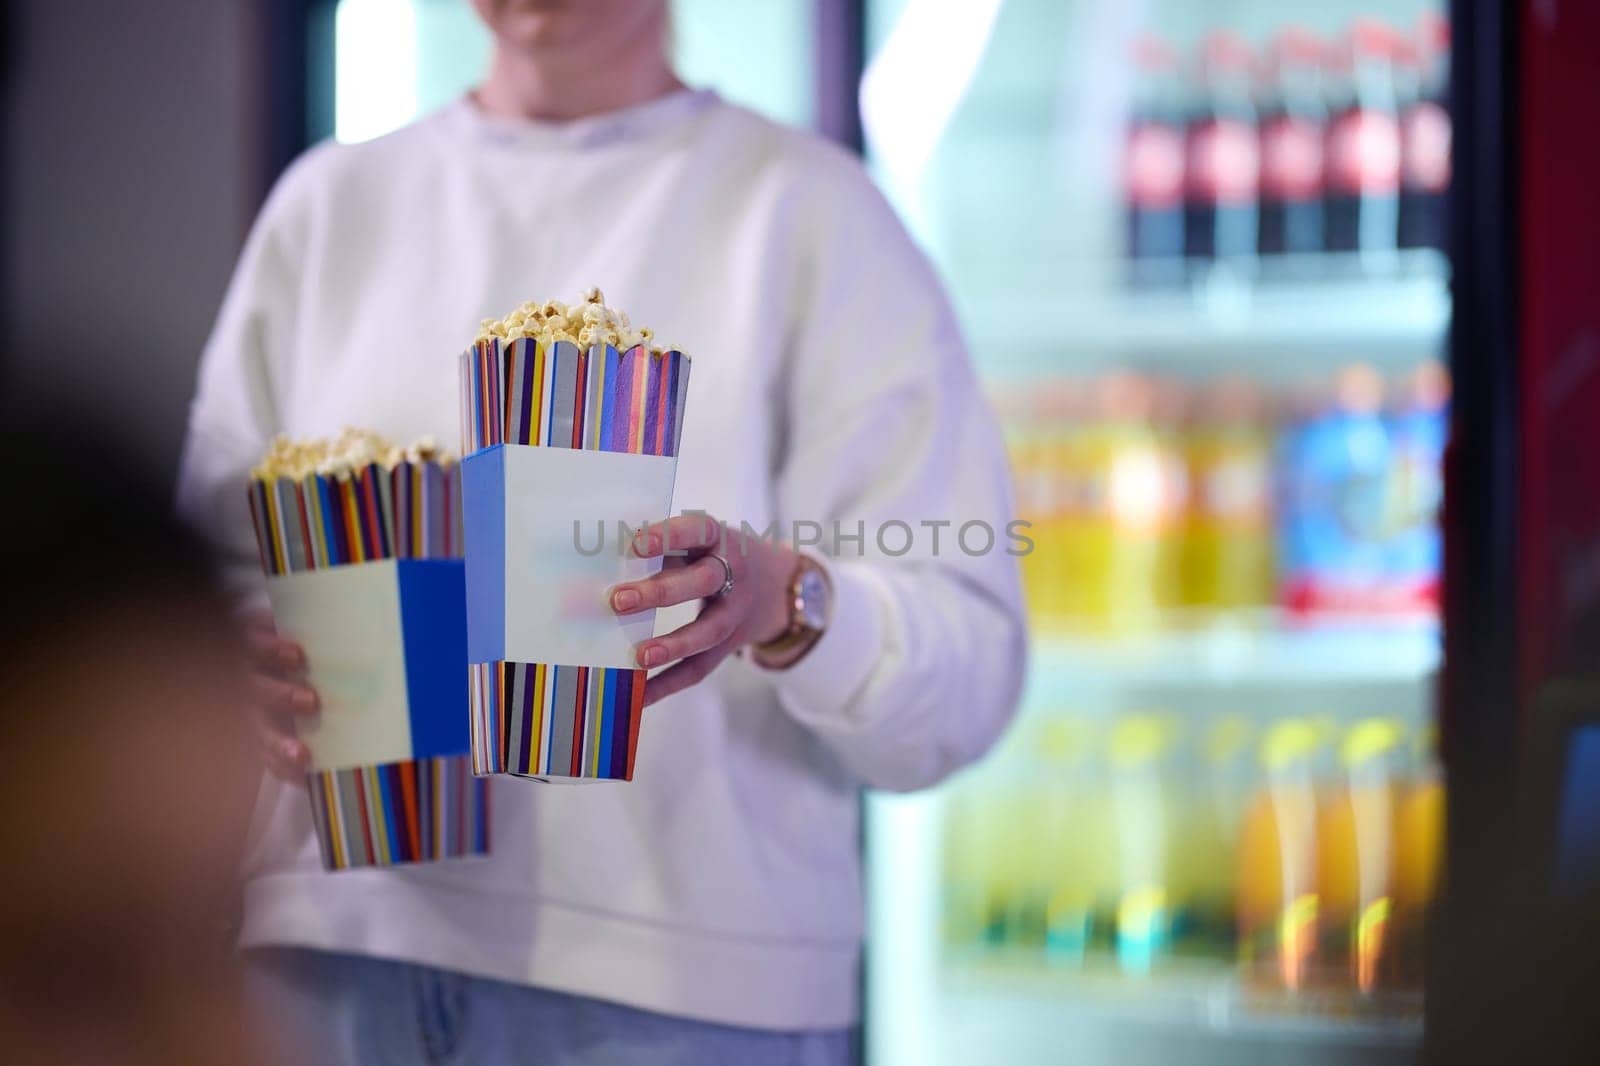 A vendor stands outside the cinema, holding freshly popped popcorn to sell to moviegoers before they enter the theater.